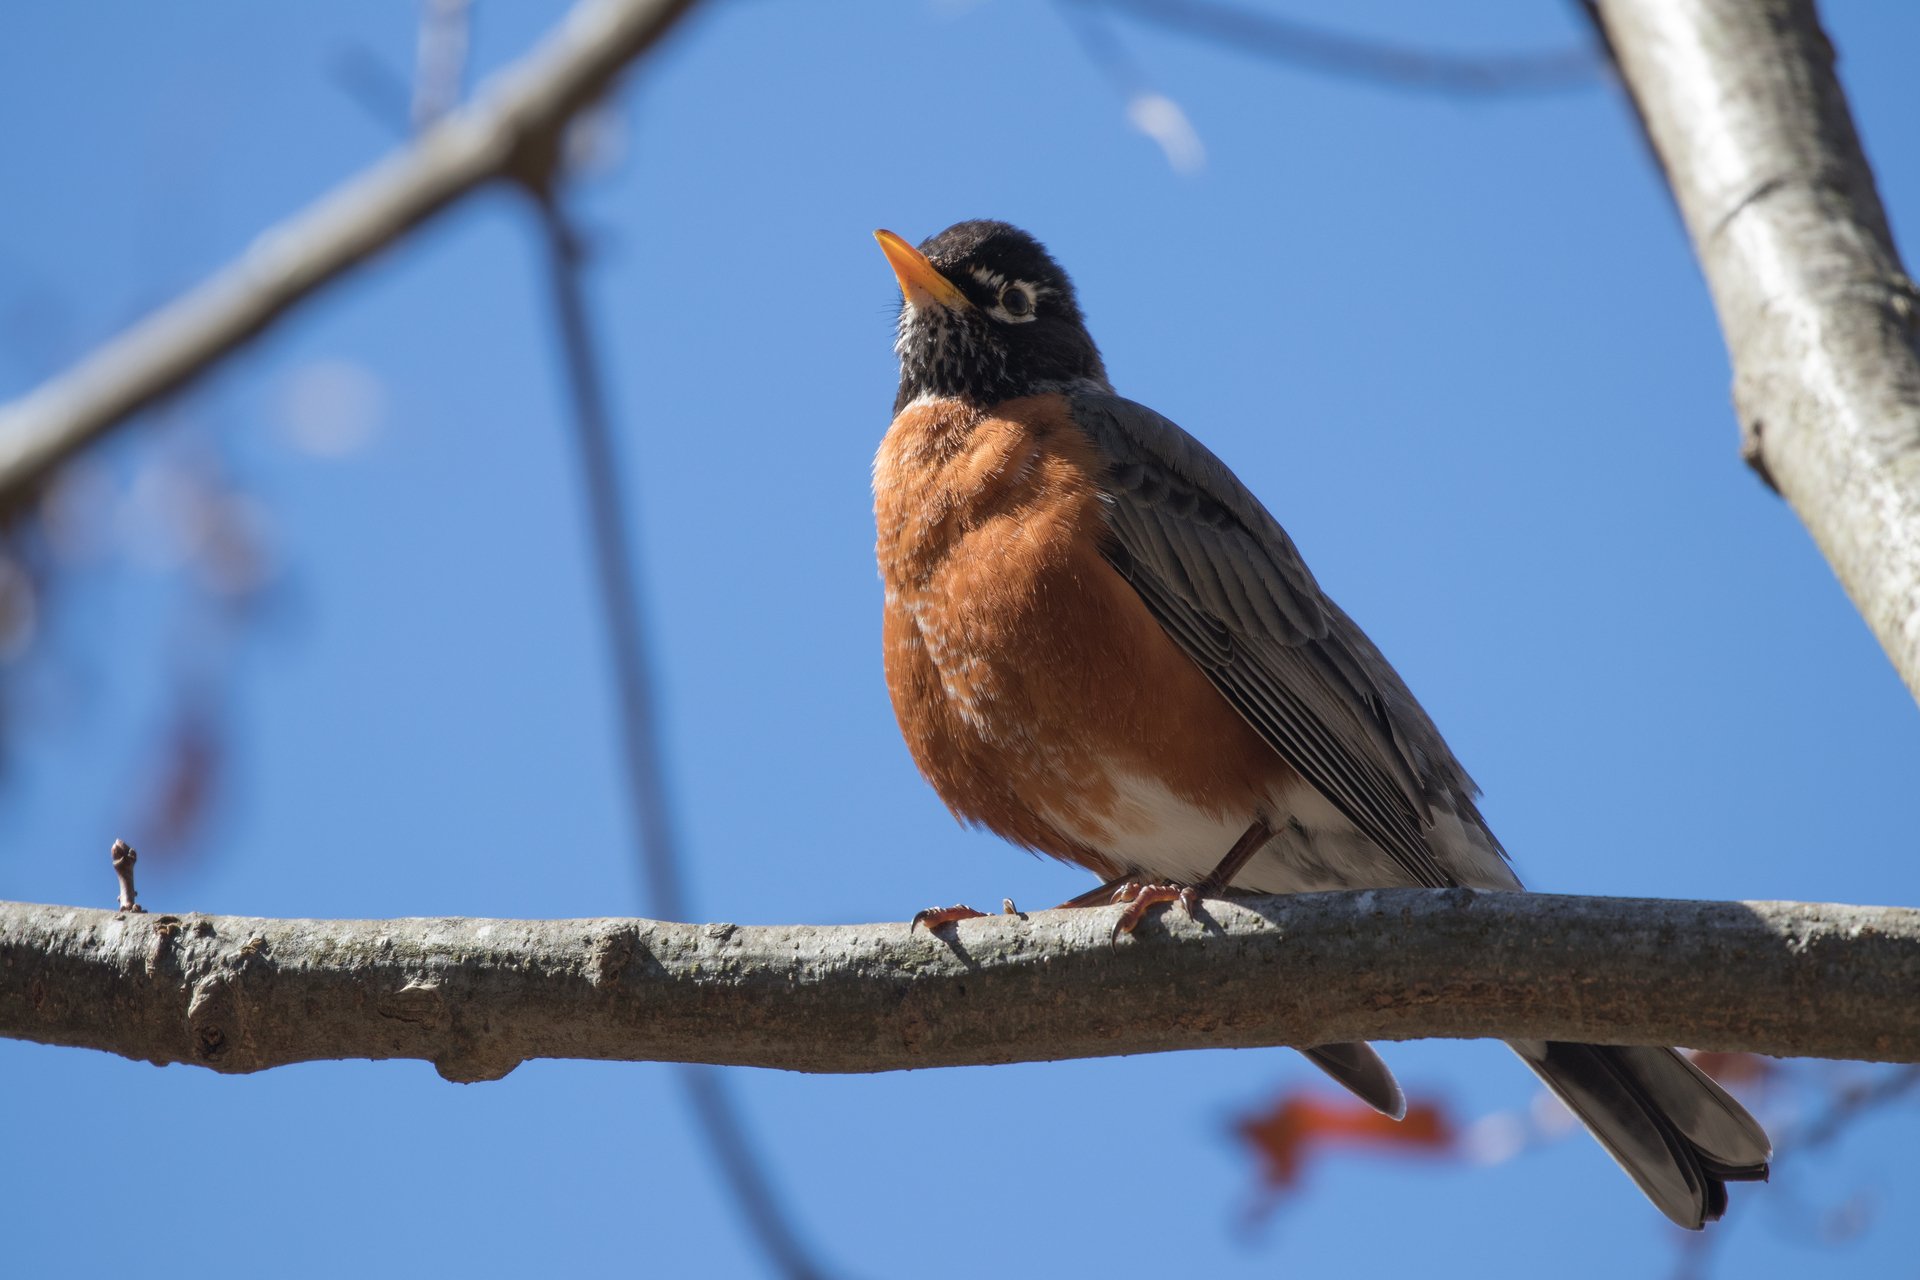 American Robin in the sun perched on branch